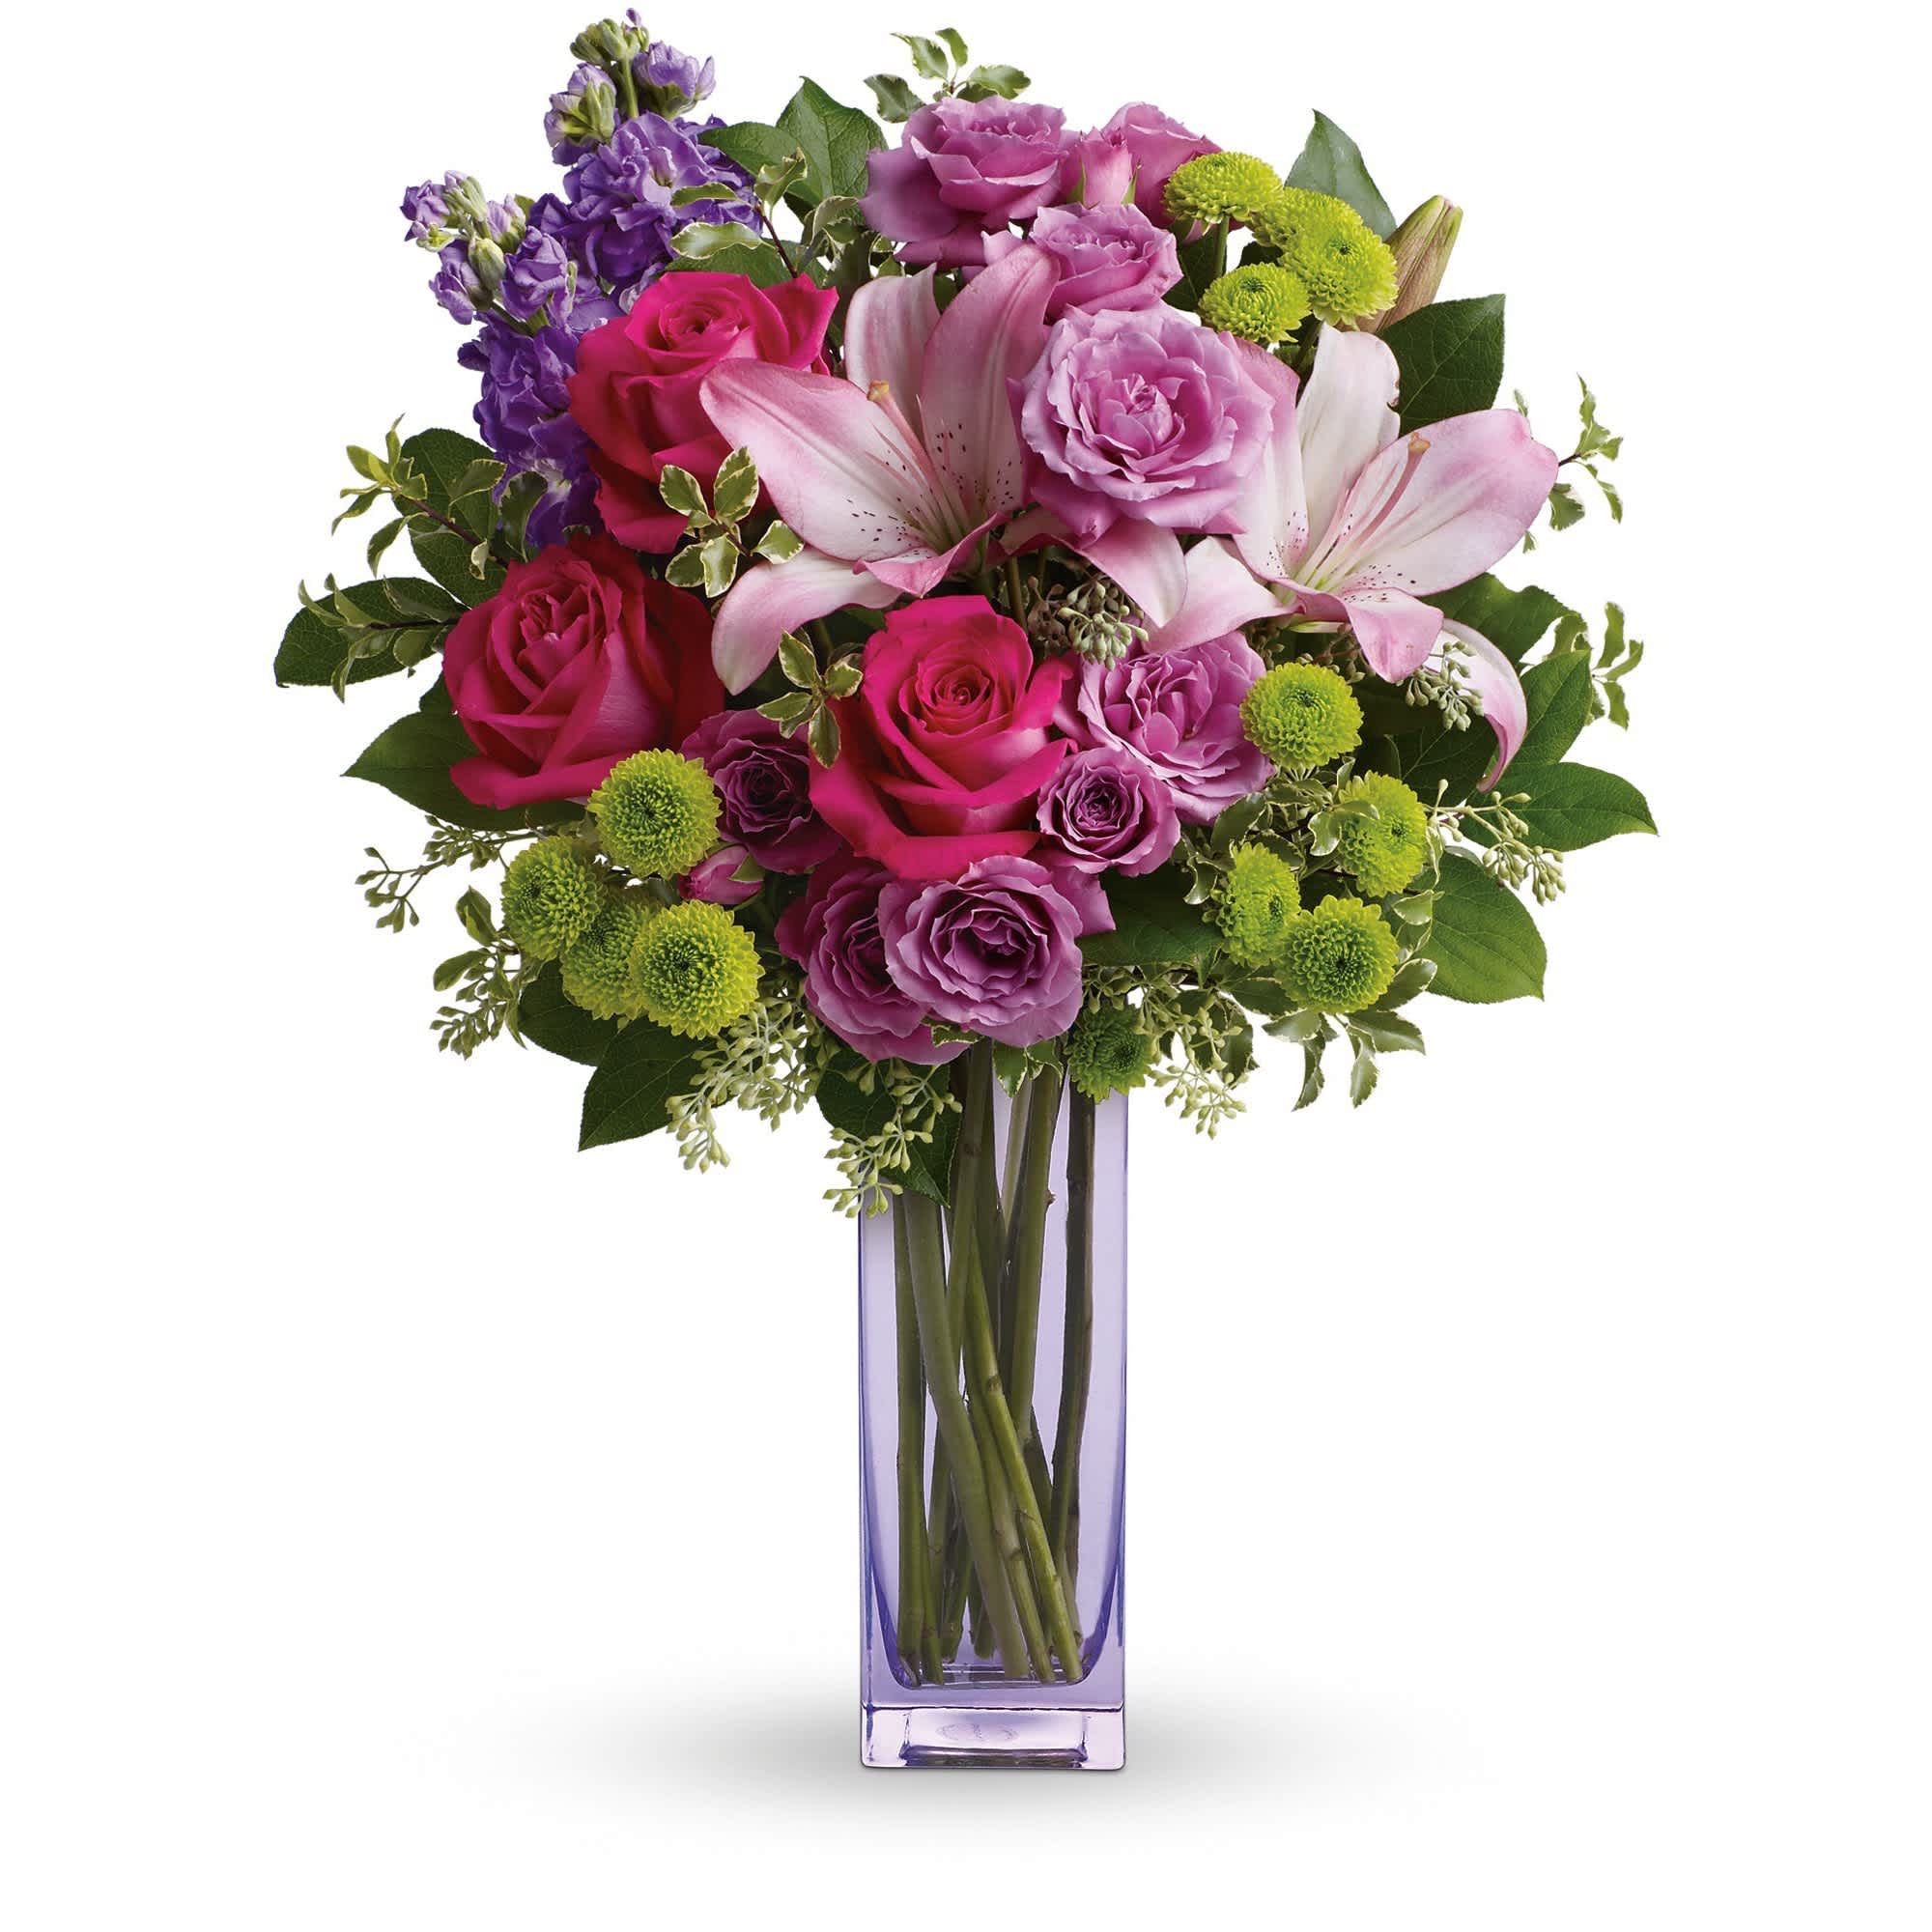 Teleflora's Fresh Flourish Bouquet - Color them happy with this bold, beautiful mix of hot pinks, flirty lavenders, and lime greens! Hand-delivered in a lavender glass vase, this posh present pampers your loved one on a special day - or any day at all! 